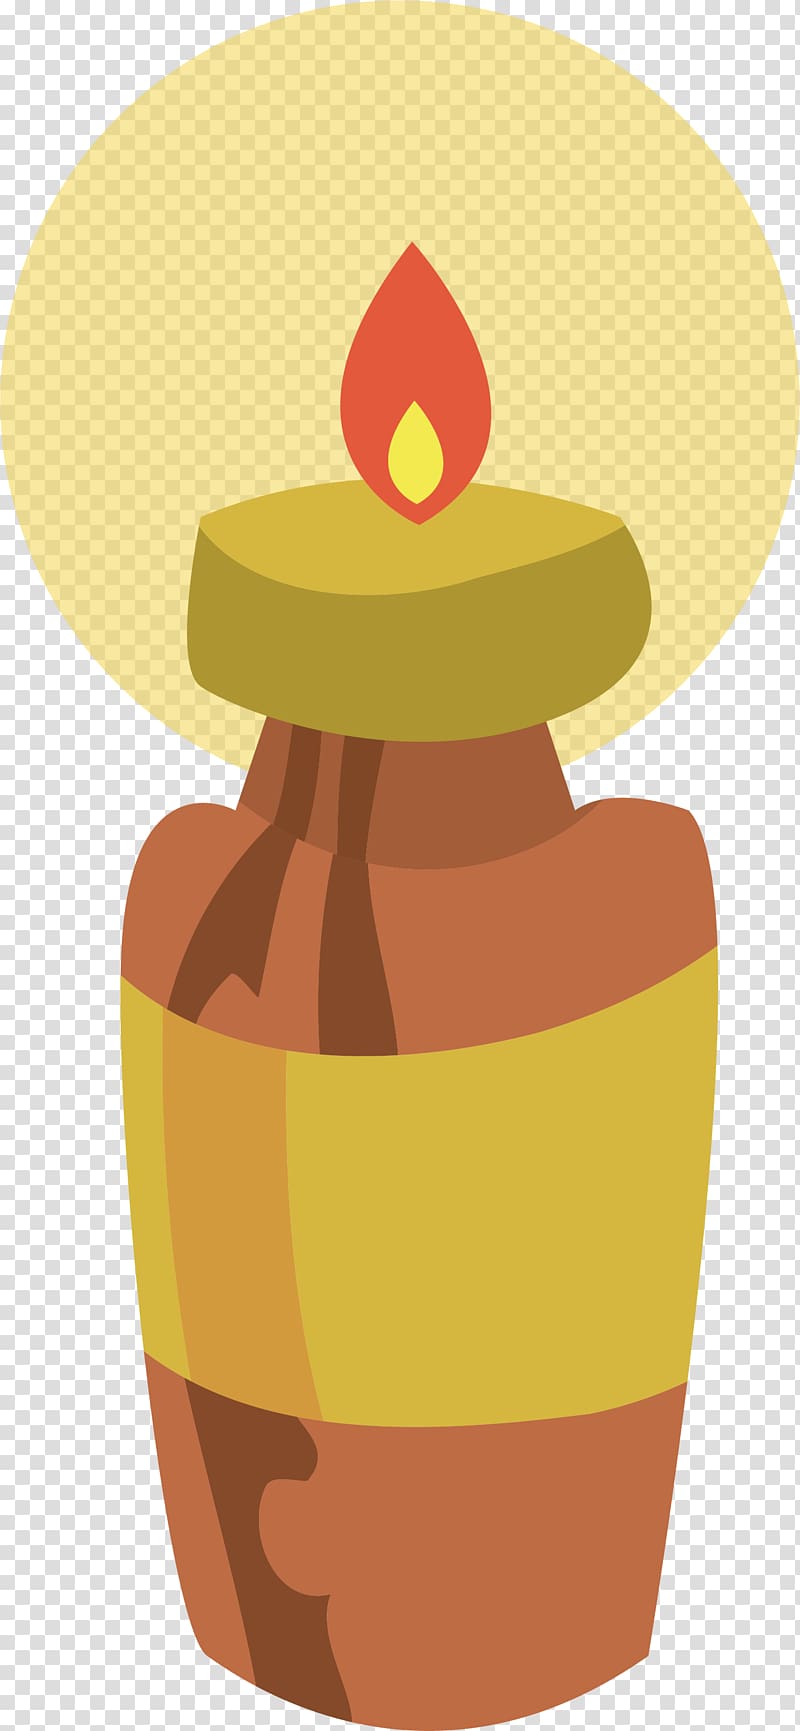 Religious festival Religion Candle, Religious festival candle transparent background PNG clipart